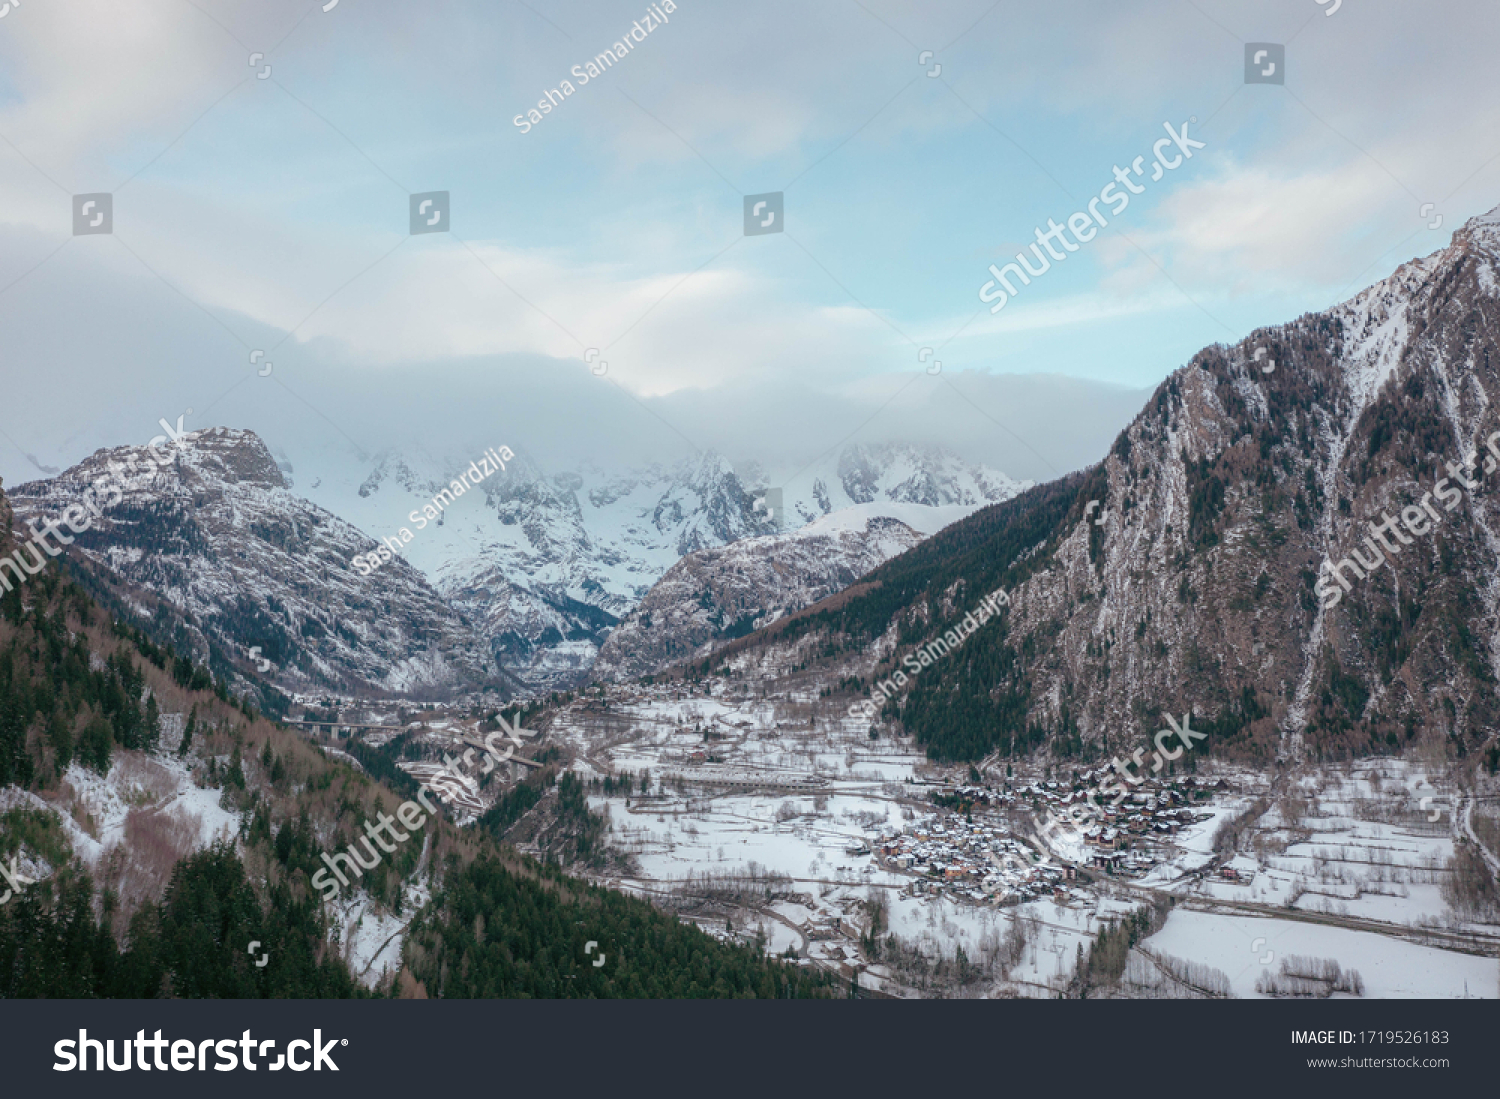 The village Palleusieux under a big mountain, in the Basin Pre-Saint-Didier, Aosta Valley at the time of corona virus outbreak, northern Italy #1719526183